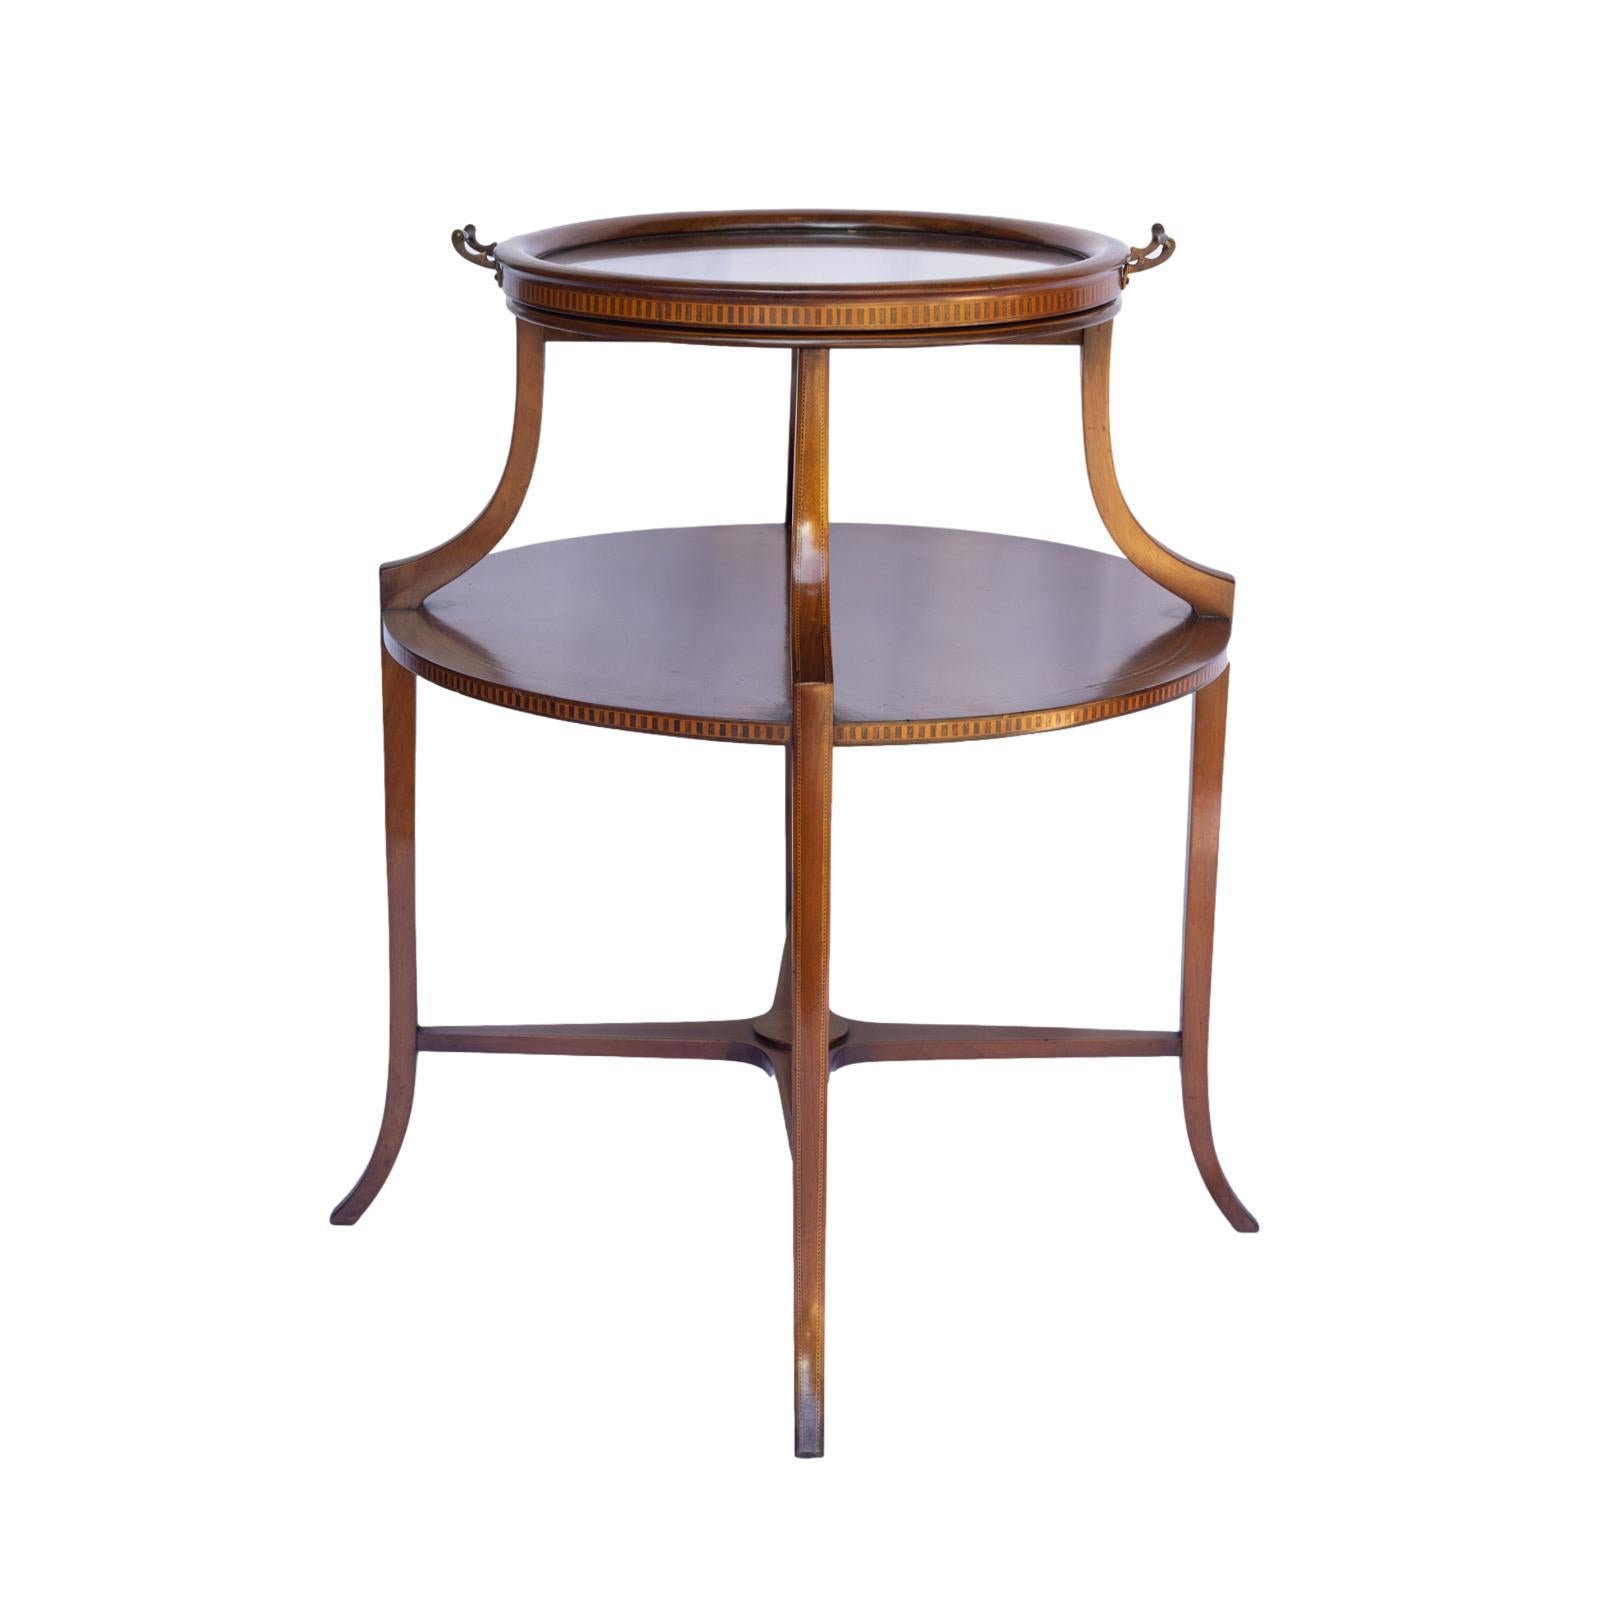 Mahogany round two-tier serving table, with satinwood inlays and stringing, with a shaped stretcher, on sabre legs with further fine checkered inlays, the removable tray with solid brass mounted handles. 
In exceptional antique condition, and